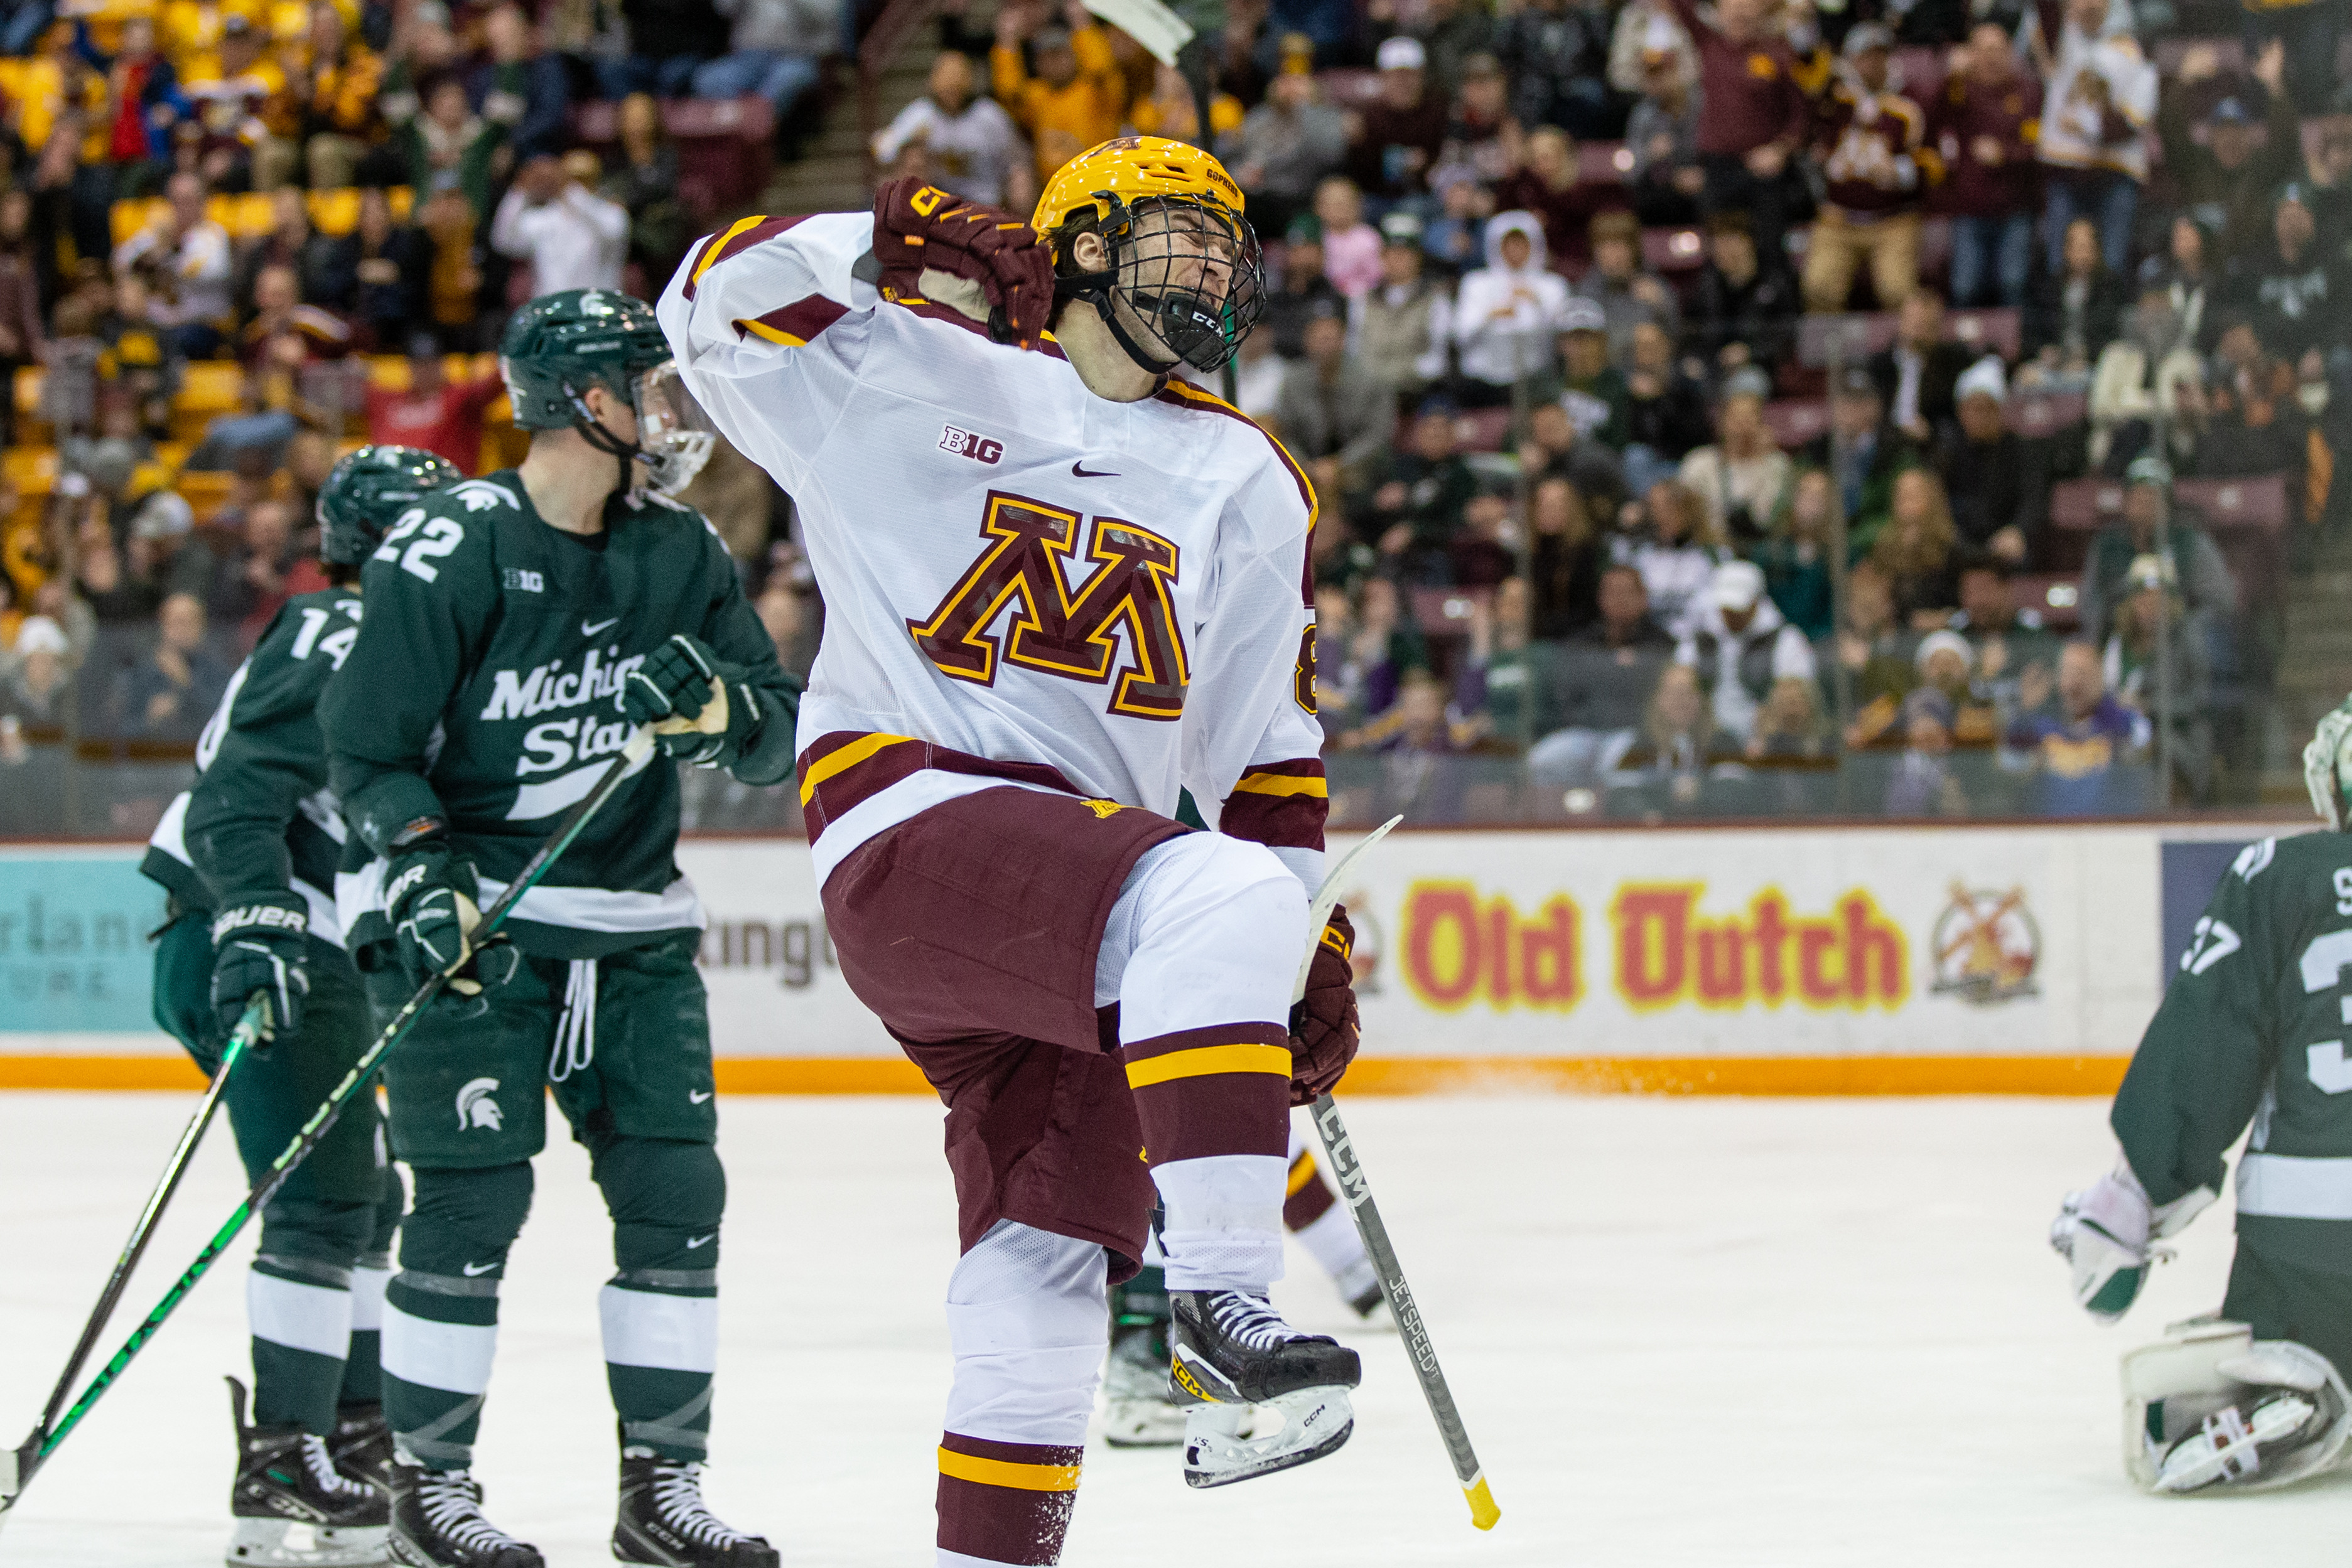 Minnesota Gophers forward Jimmy Snuggerud (81) celebrates a goal during the college hockey game between the Michigan State Spartans and the Minnesota Gophers on January 27th, 2022, at 3M Arena at Mariucci in Minneapolis, MN.